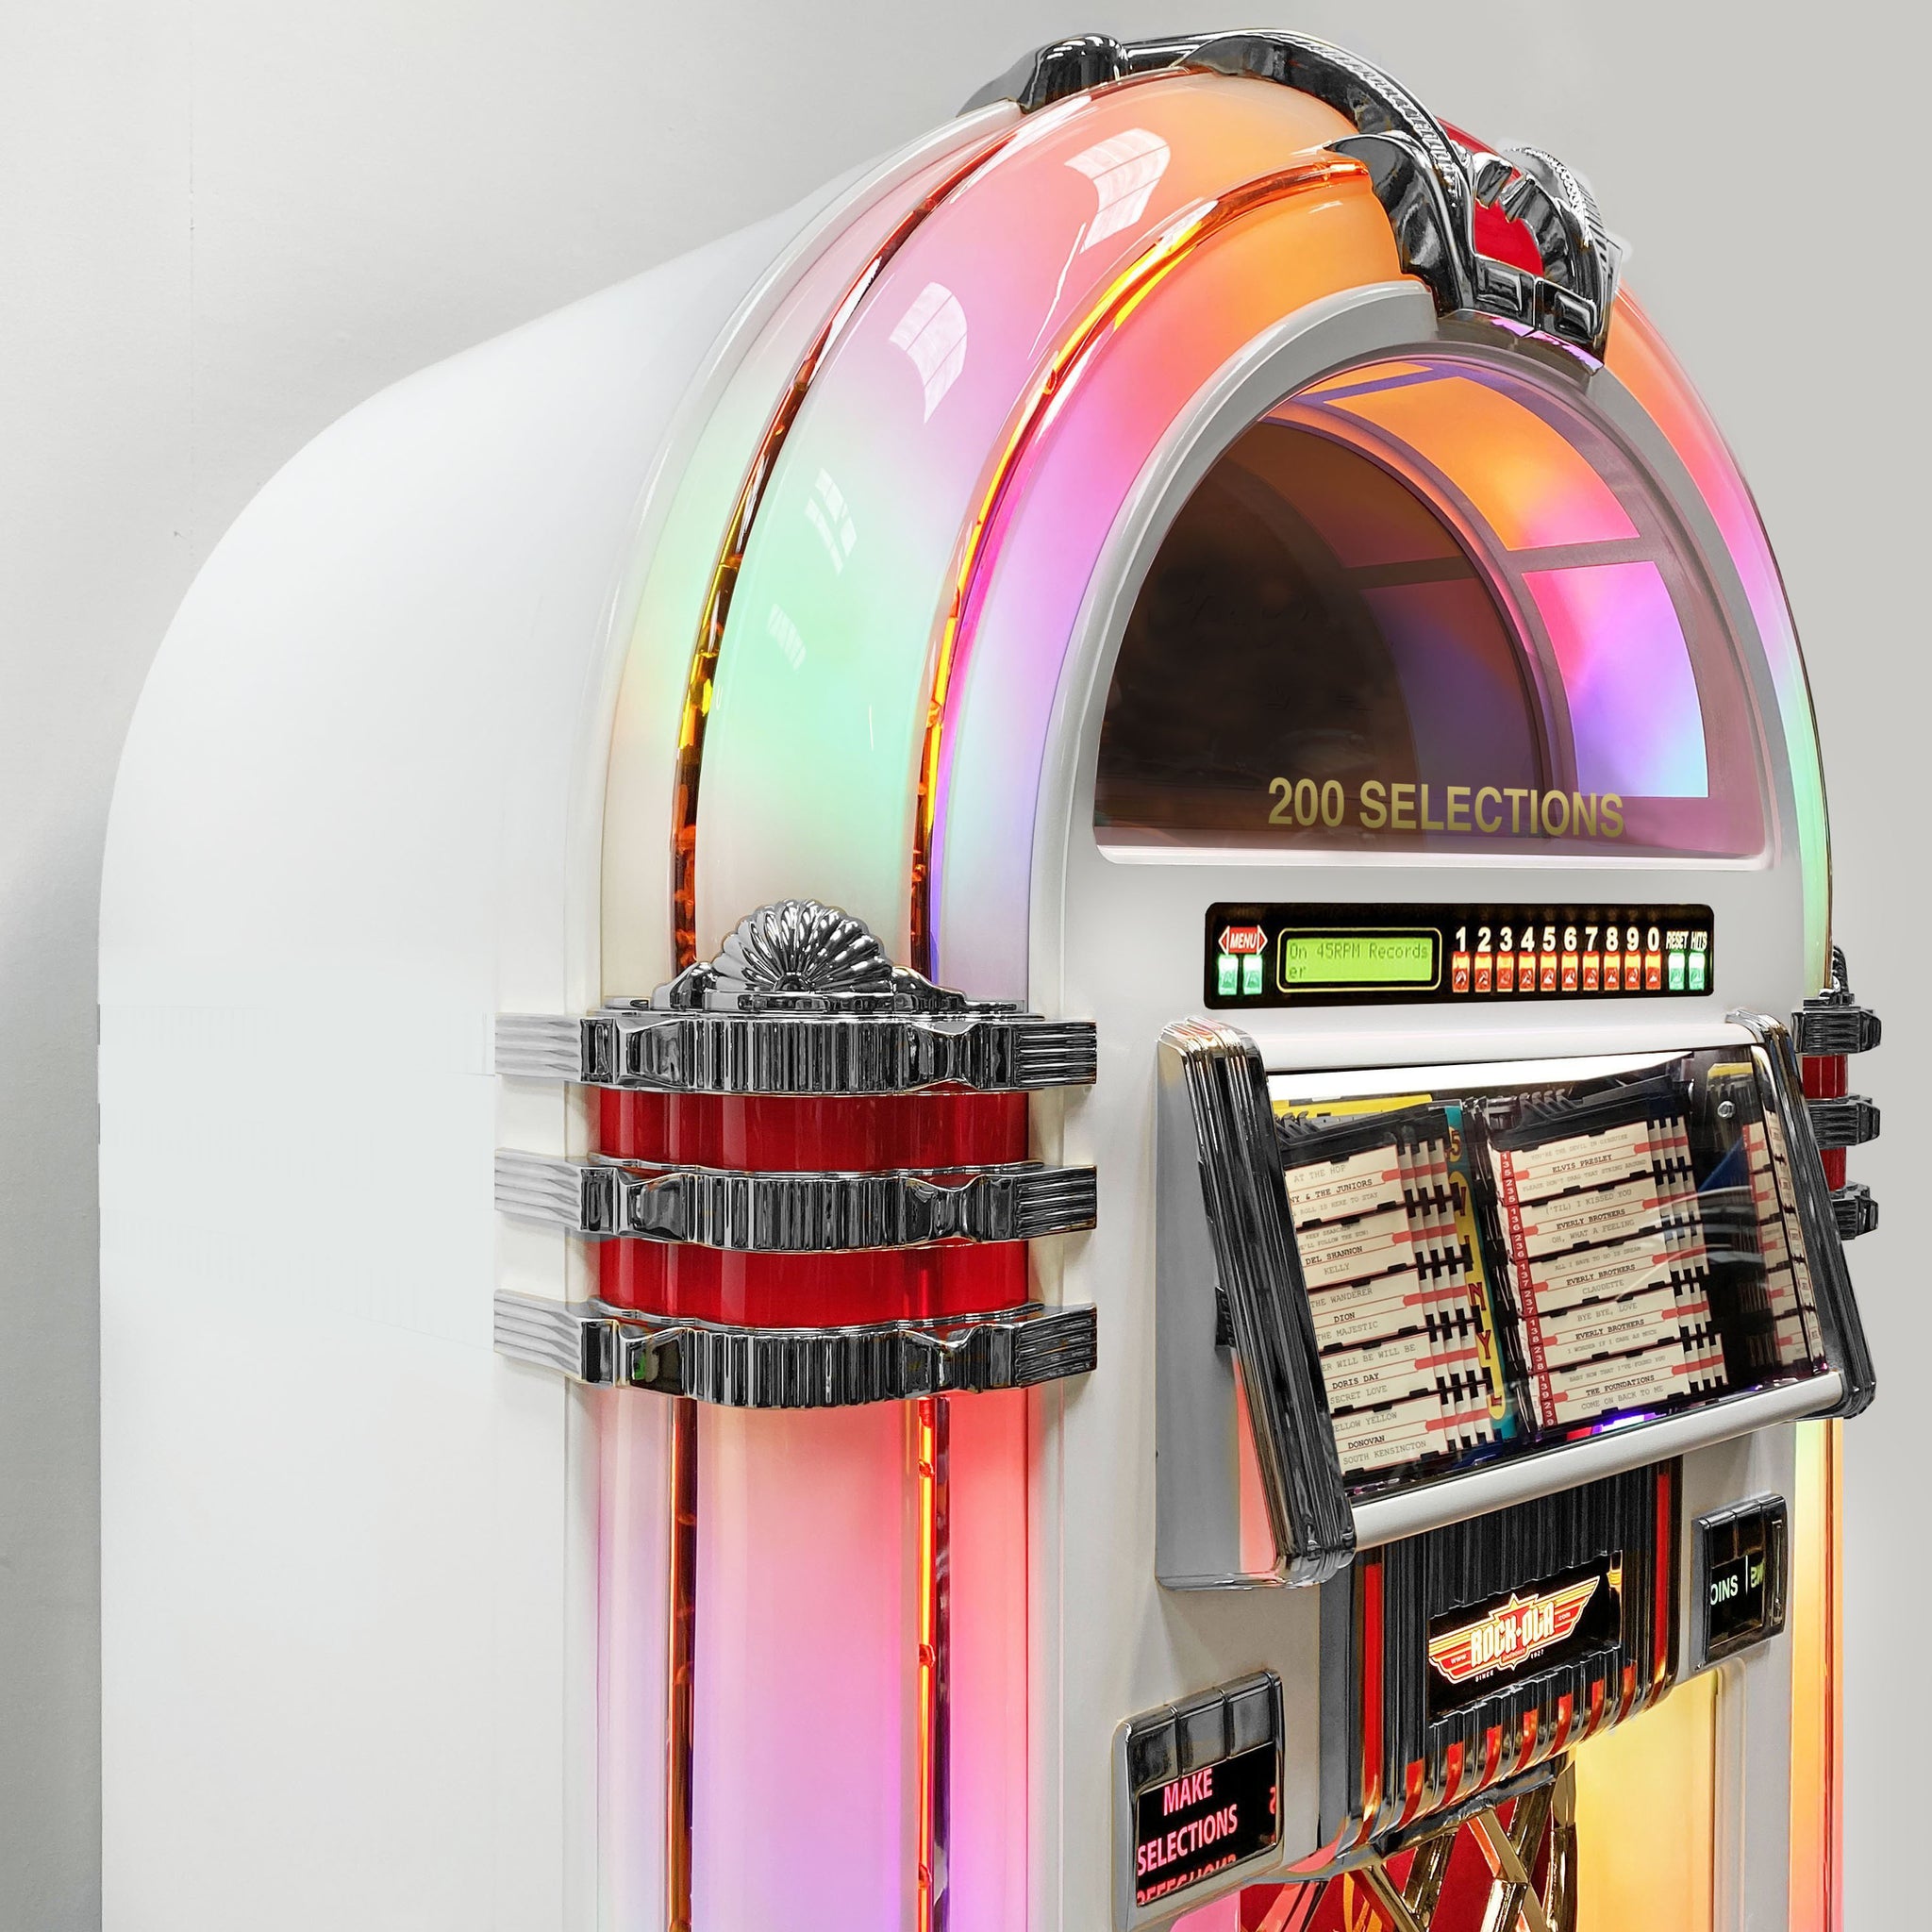 Rock-Ola Bubbler Vinyl 45 Jukebox in Gloss White with Bluetooth